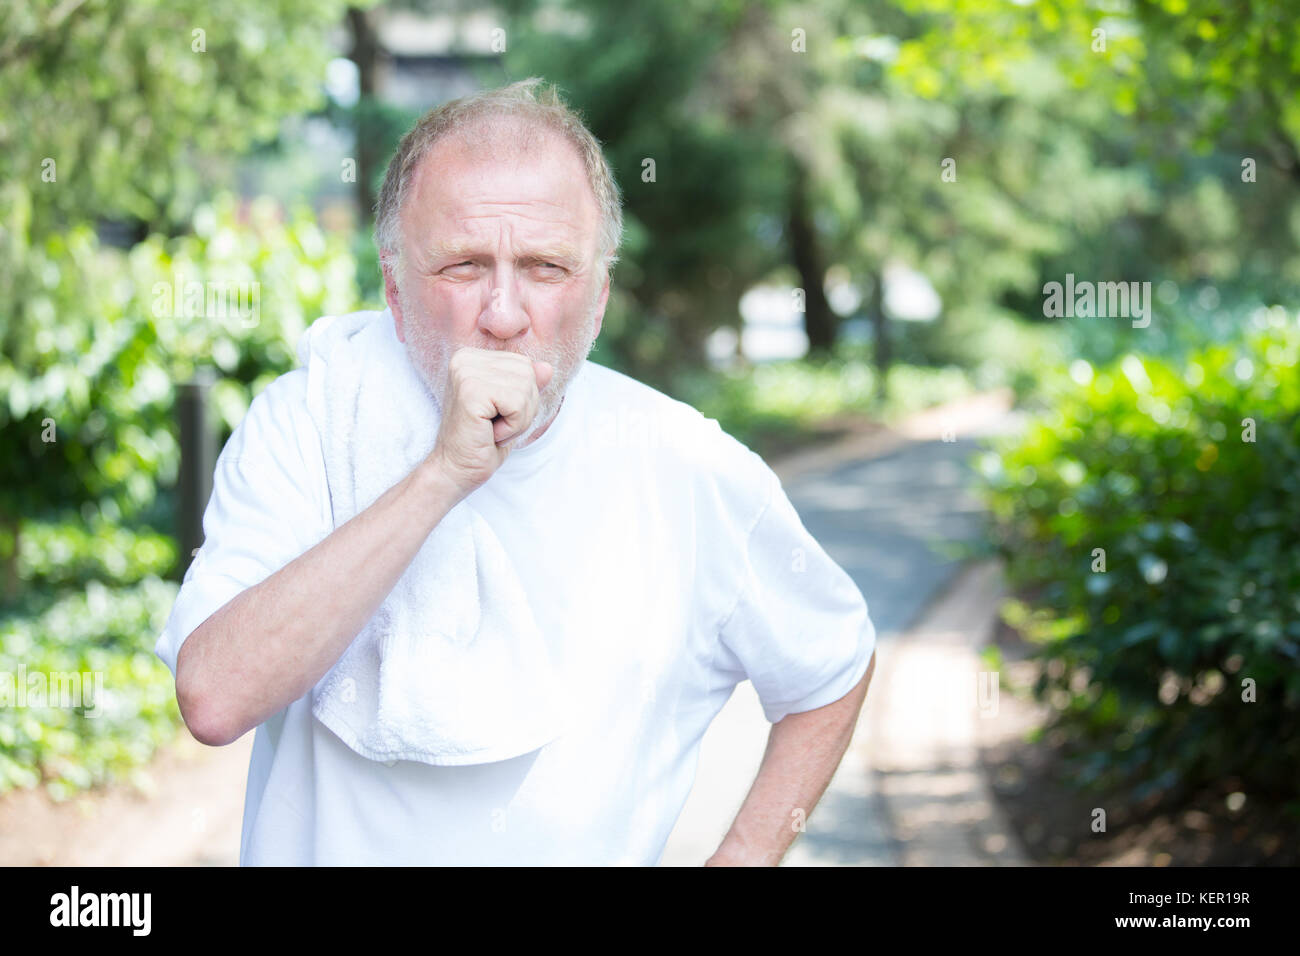 Closeup portrait, senior guy holding towel, very tired, exhausted from over exertion, coughing catching breath, isolated outdoors outside green trees  Stock Photo